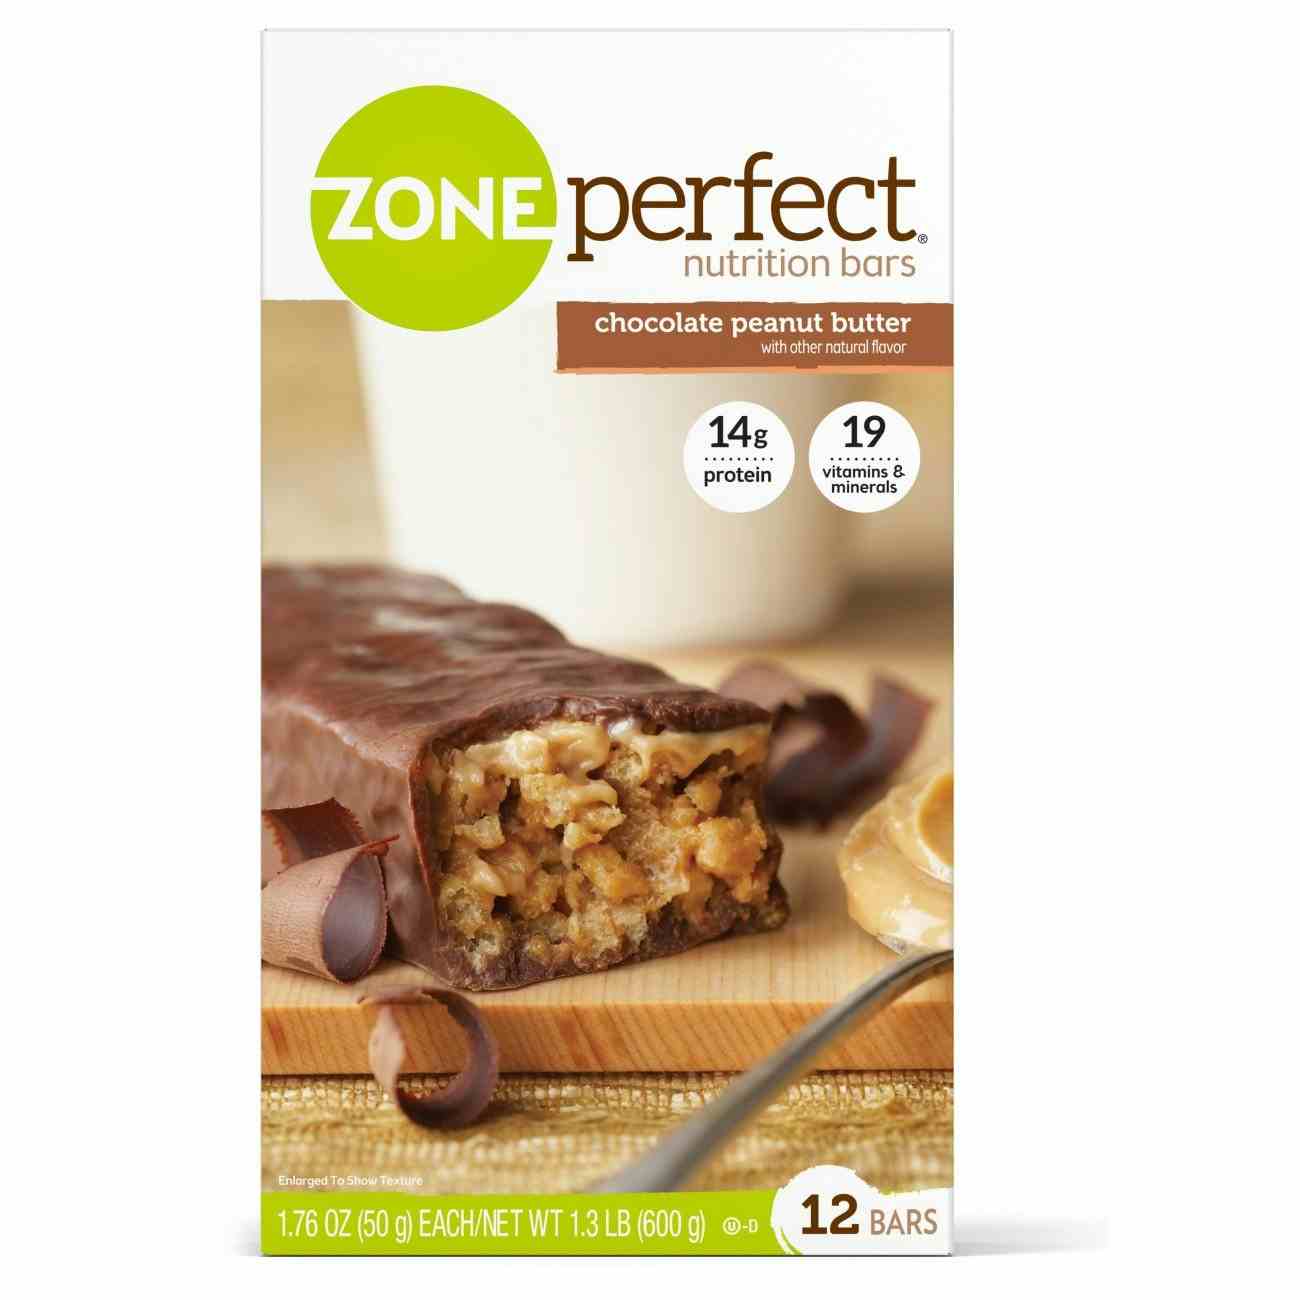 ZonePerfect Nutrition Bars, Chocolate Peanut Butter, 63161, Box of 12